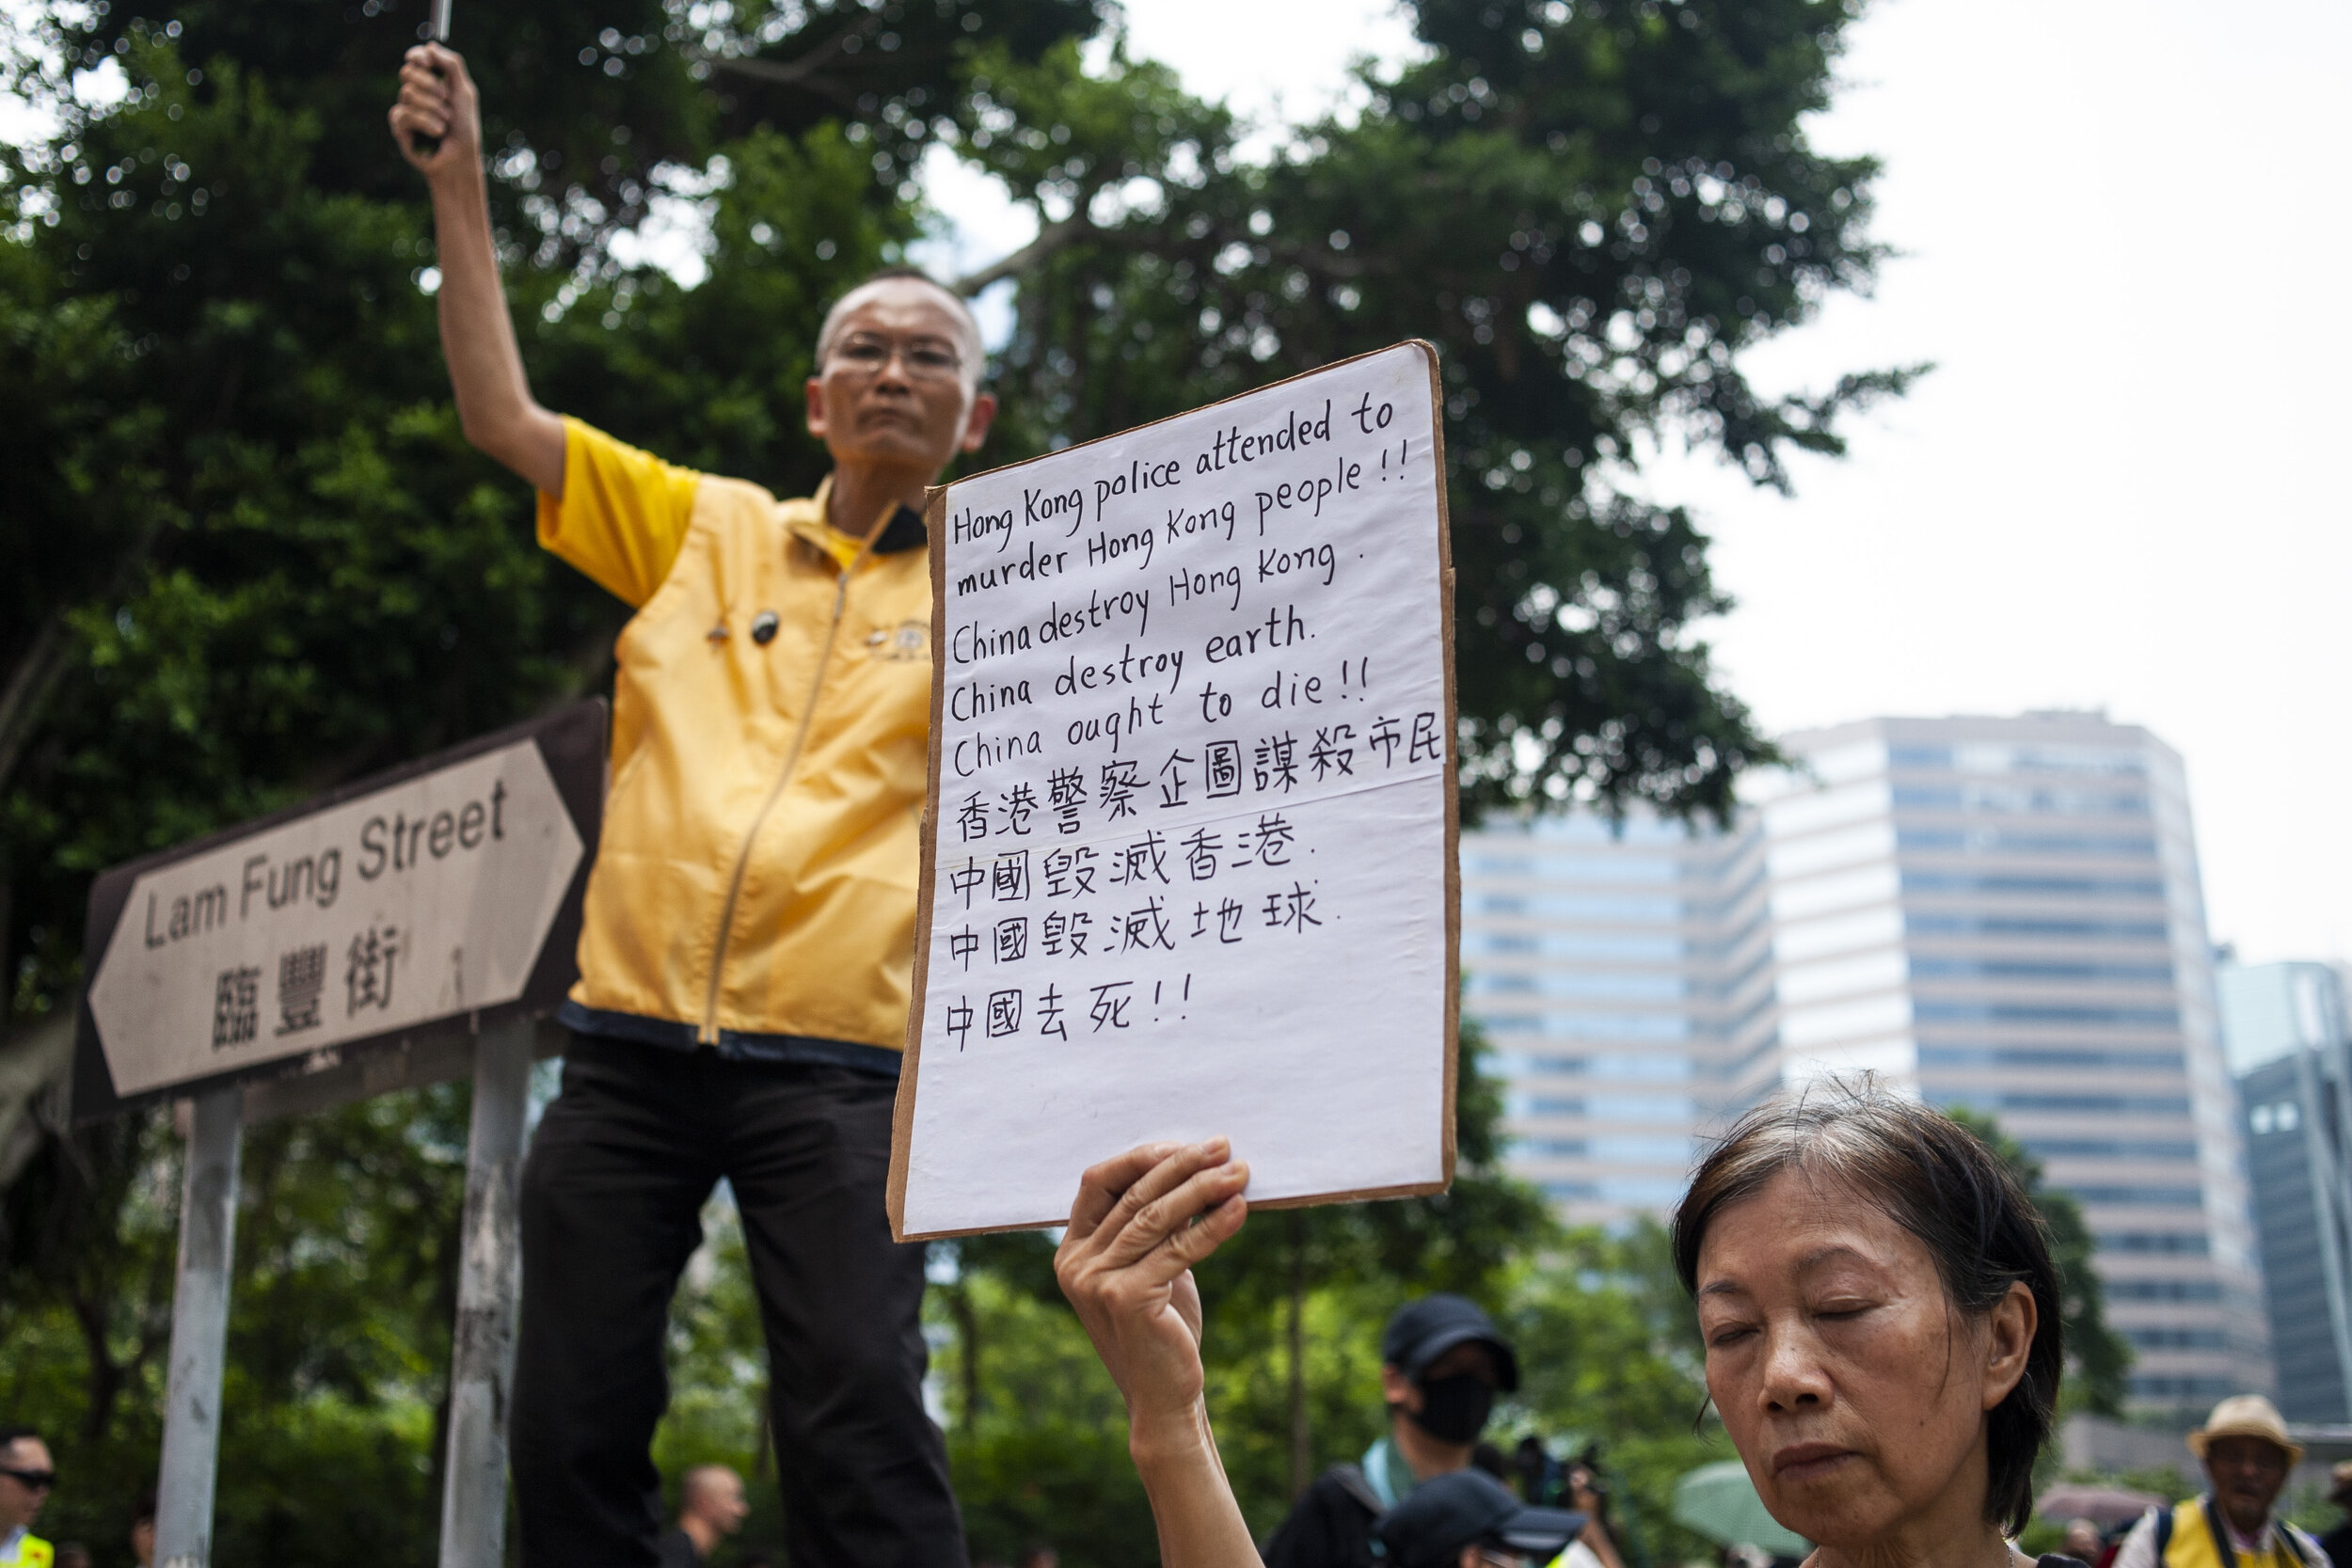  Pro-democracy protesters hold signs during a march in Kwun Tong against police surveillance and the introduction of ‘smart light poles’ which use facial recognition technology on August 24, 2019. The march later turned into a stand-off with riot pol